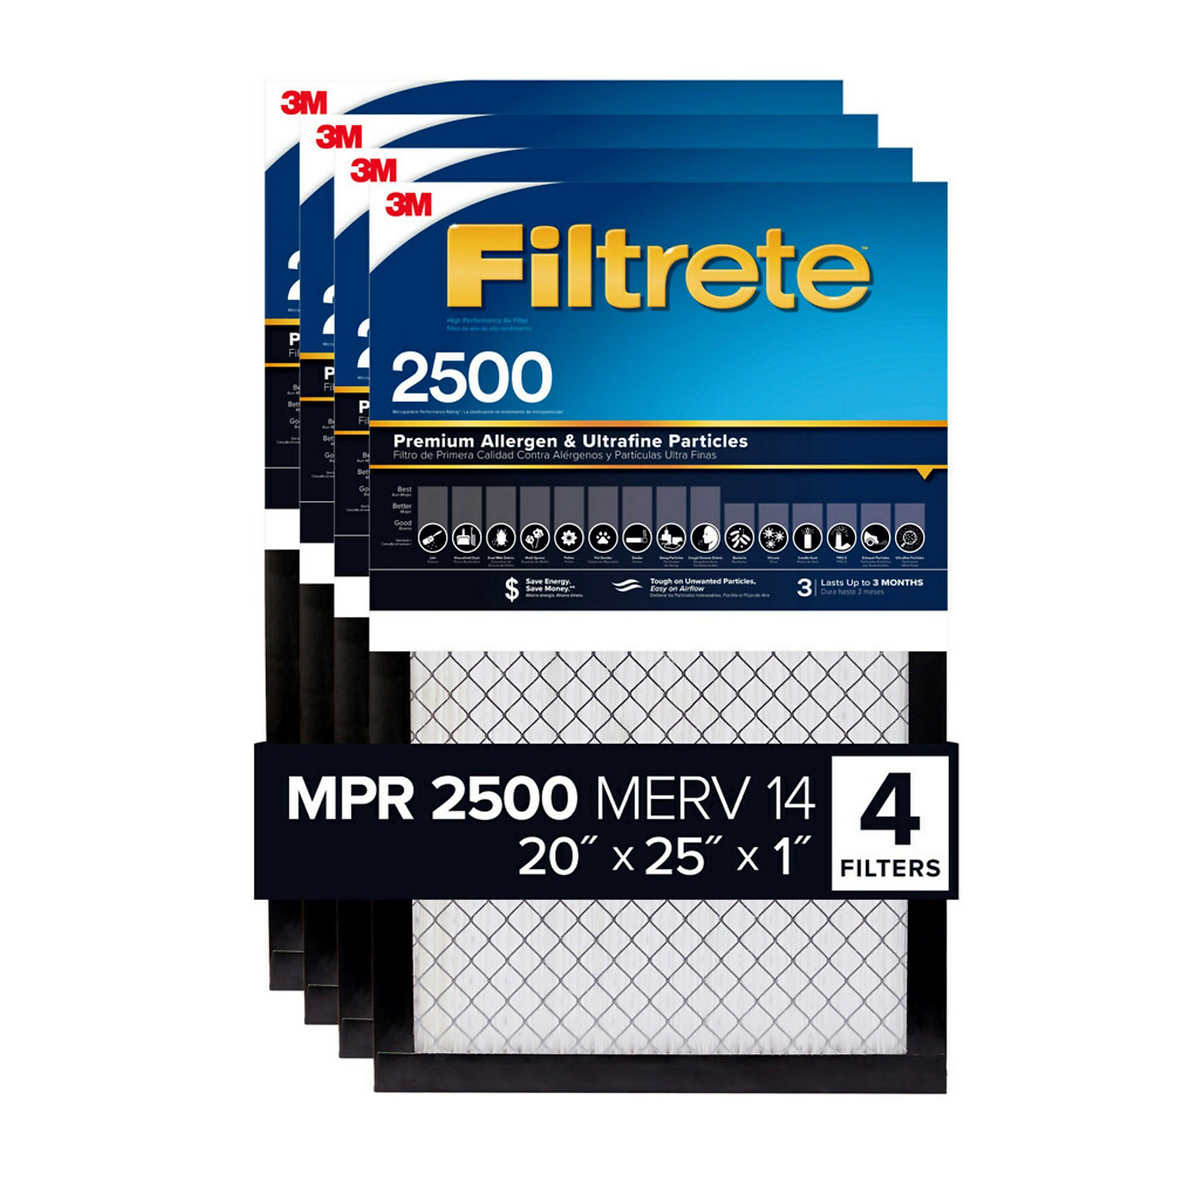 3M 2500 Series Filtrete 1" Filter, 20 x 25 x 1 (Pack of 4)